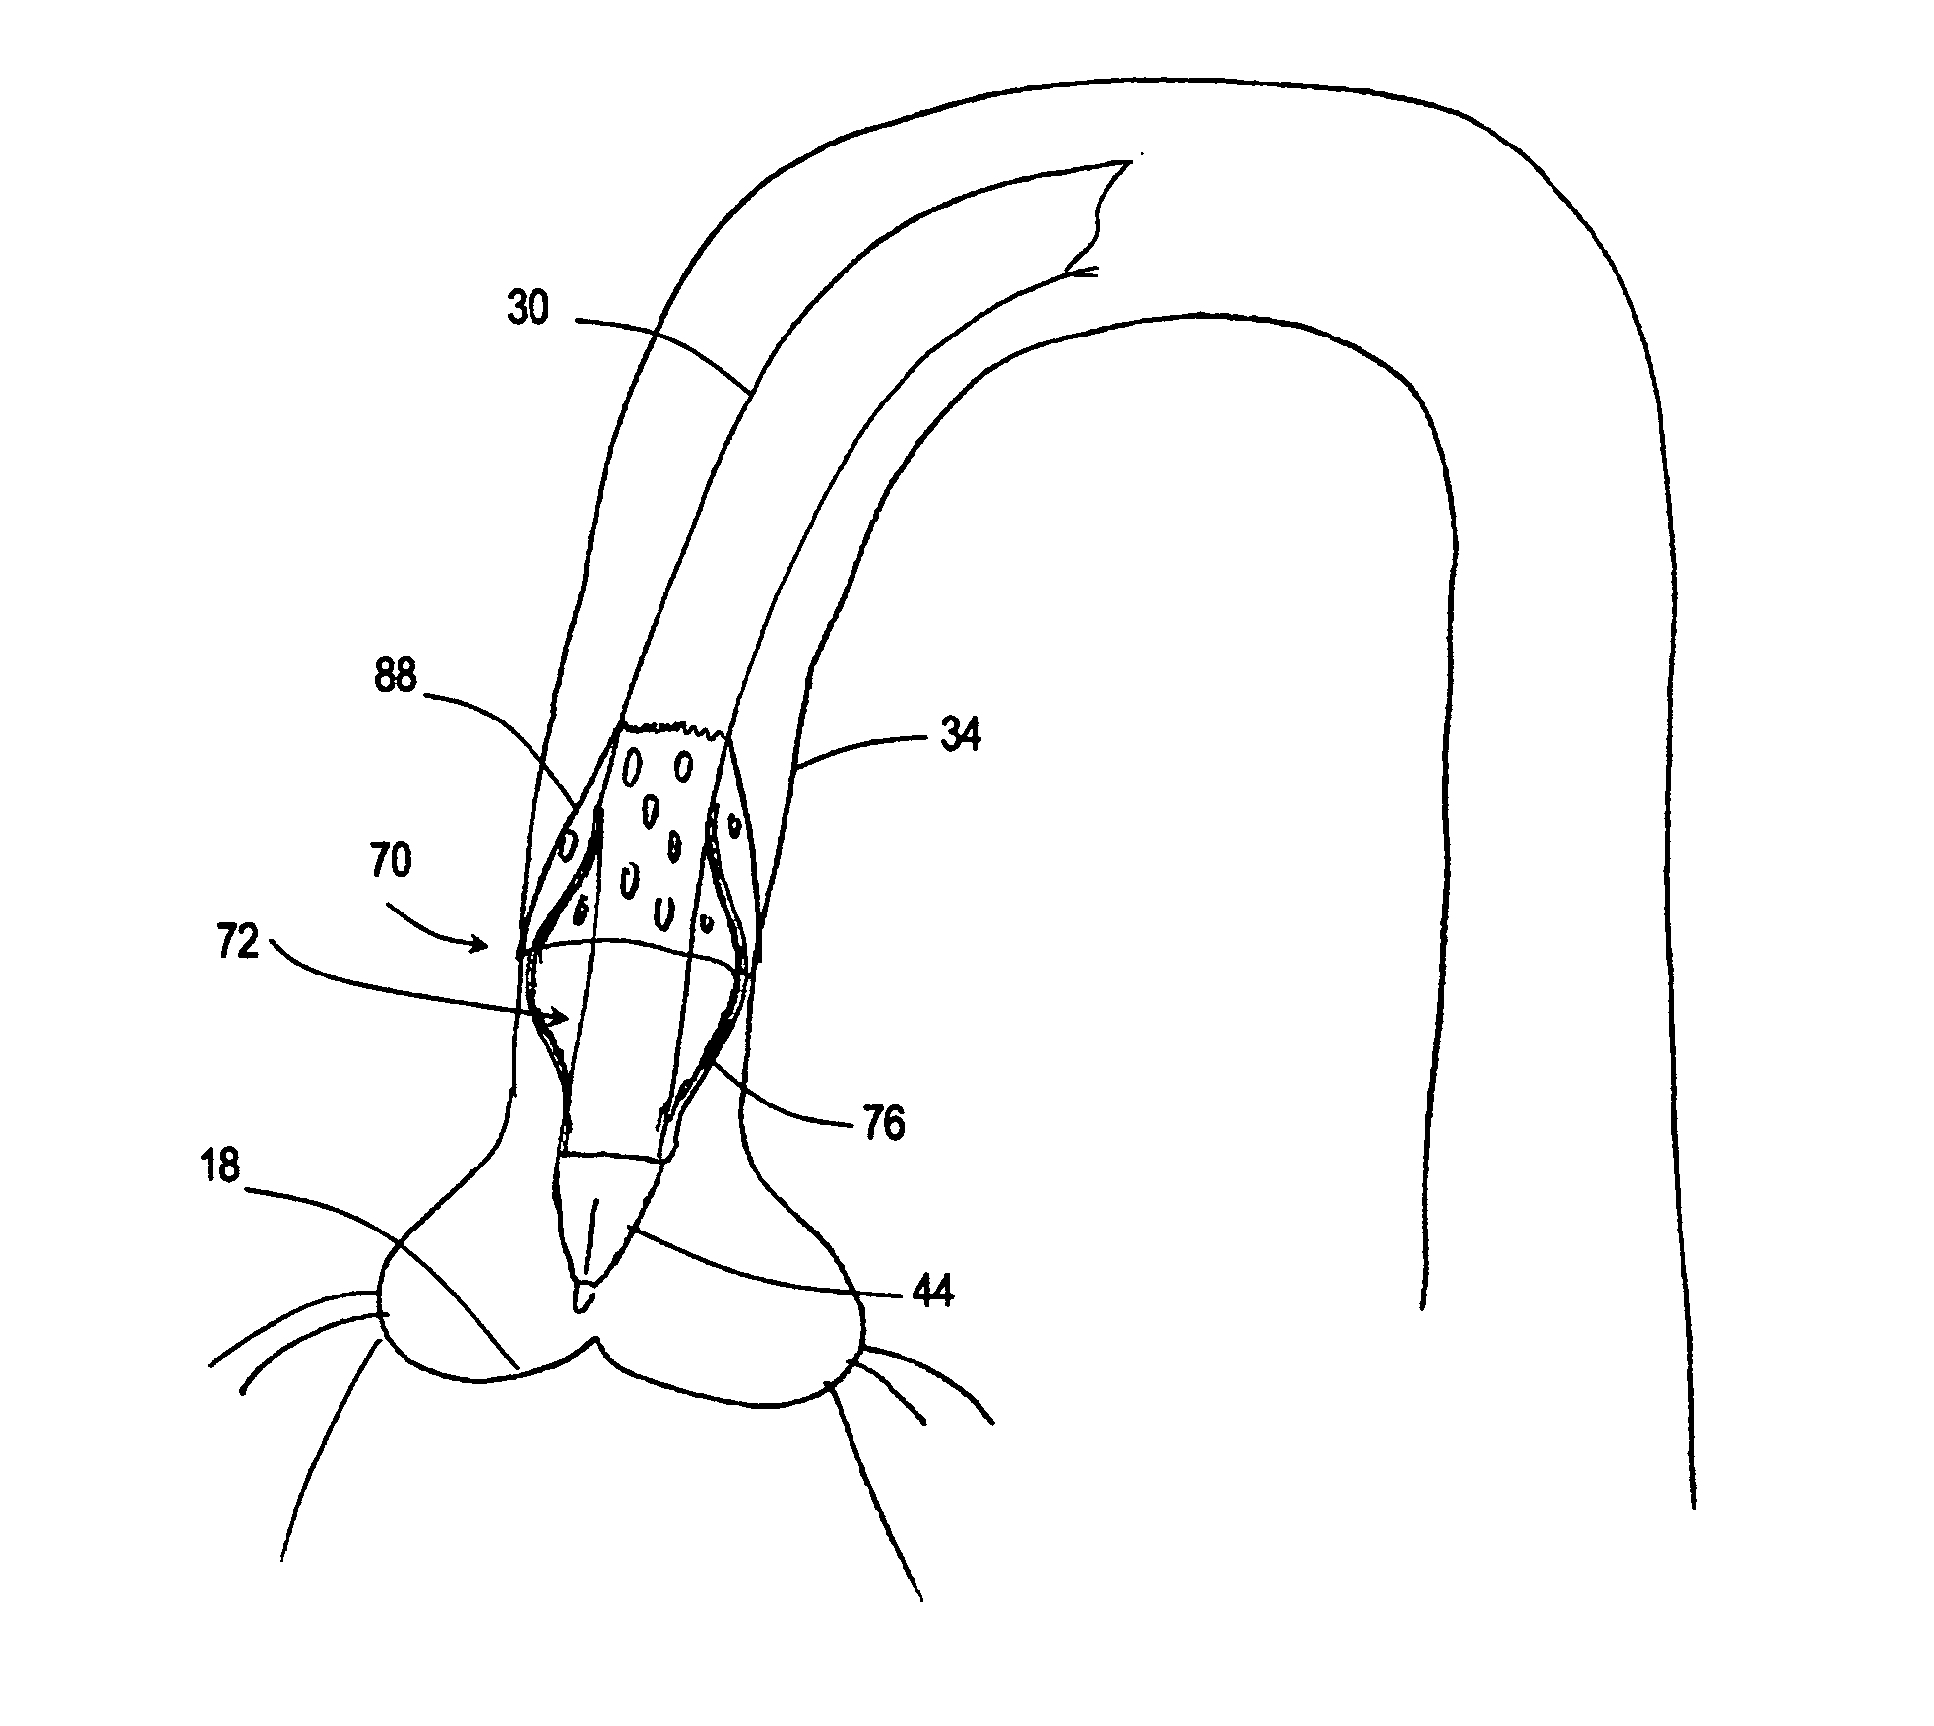 Method and Apparatus Useful for Transcatheter Aortic Valve Implantation